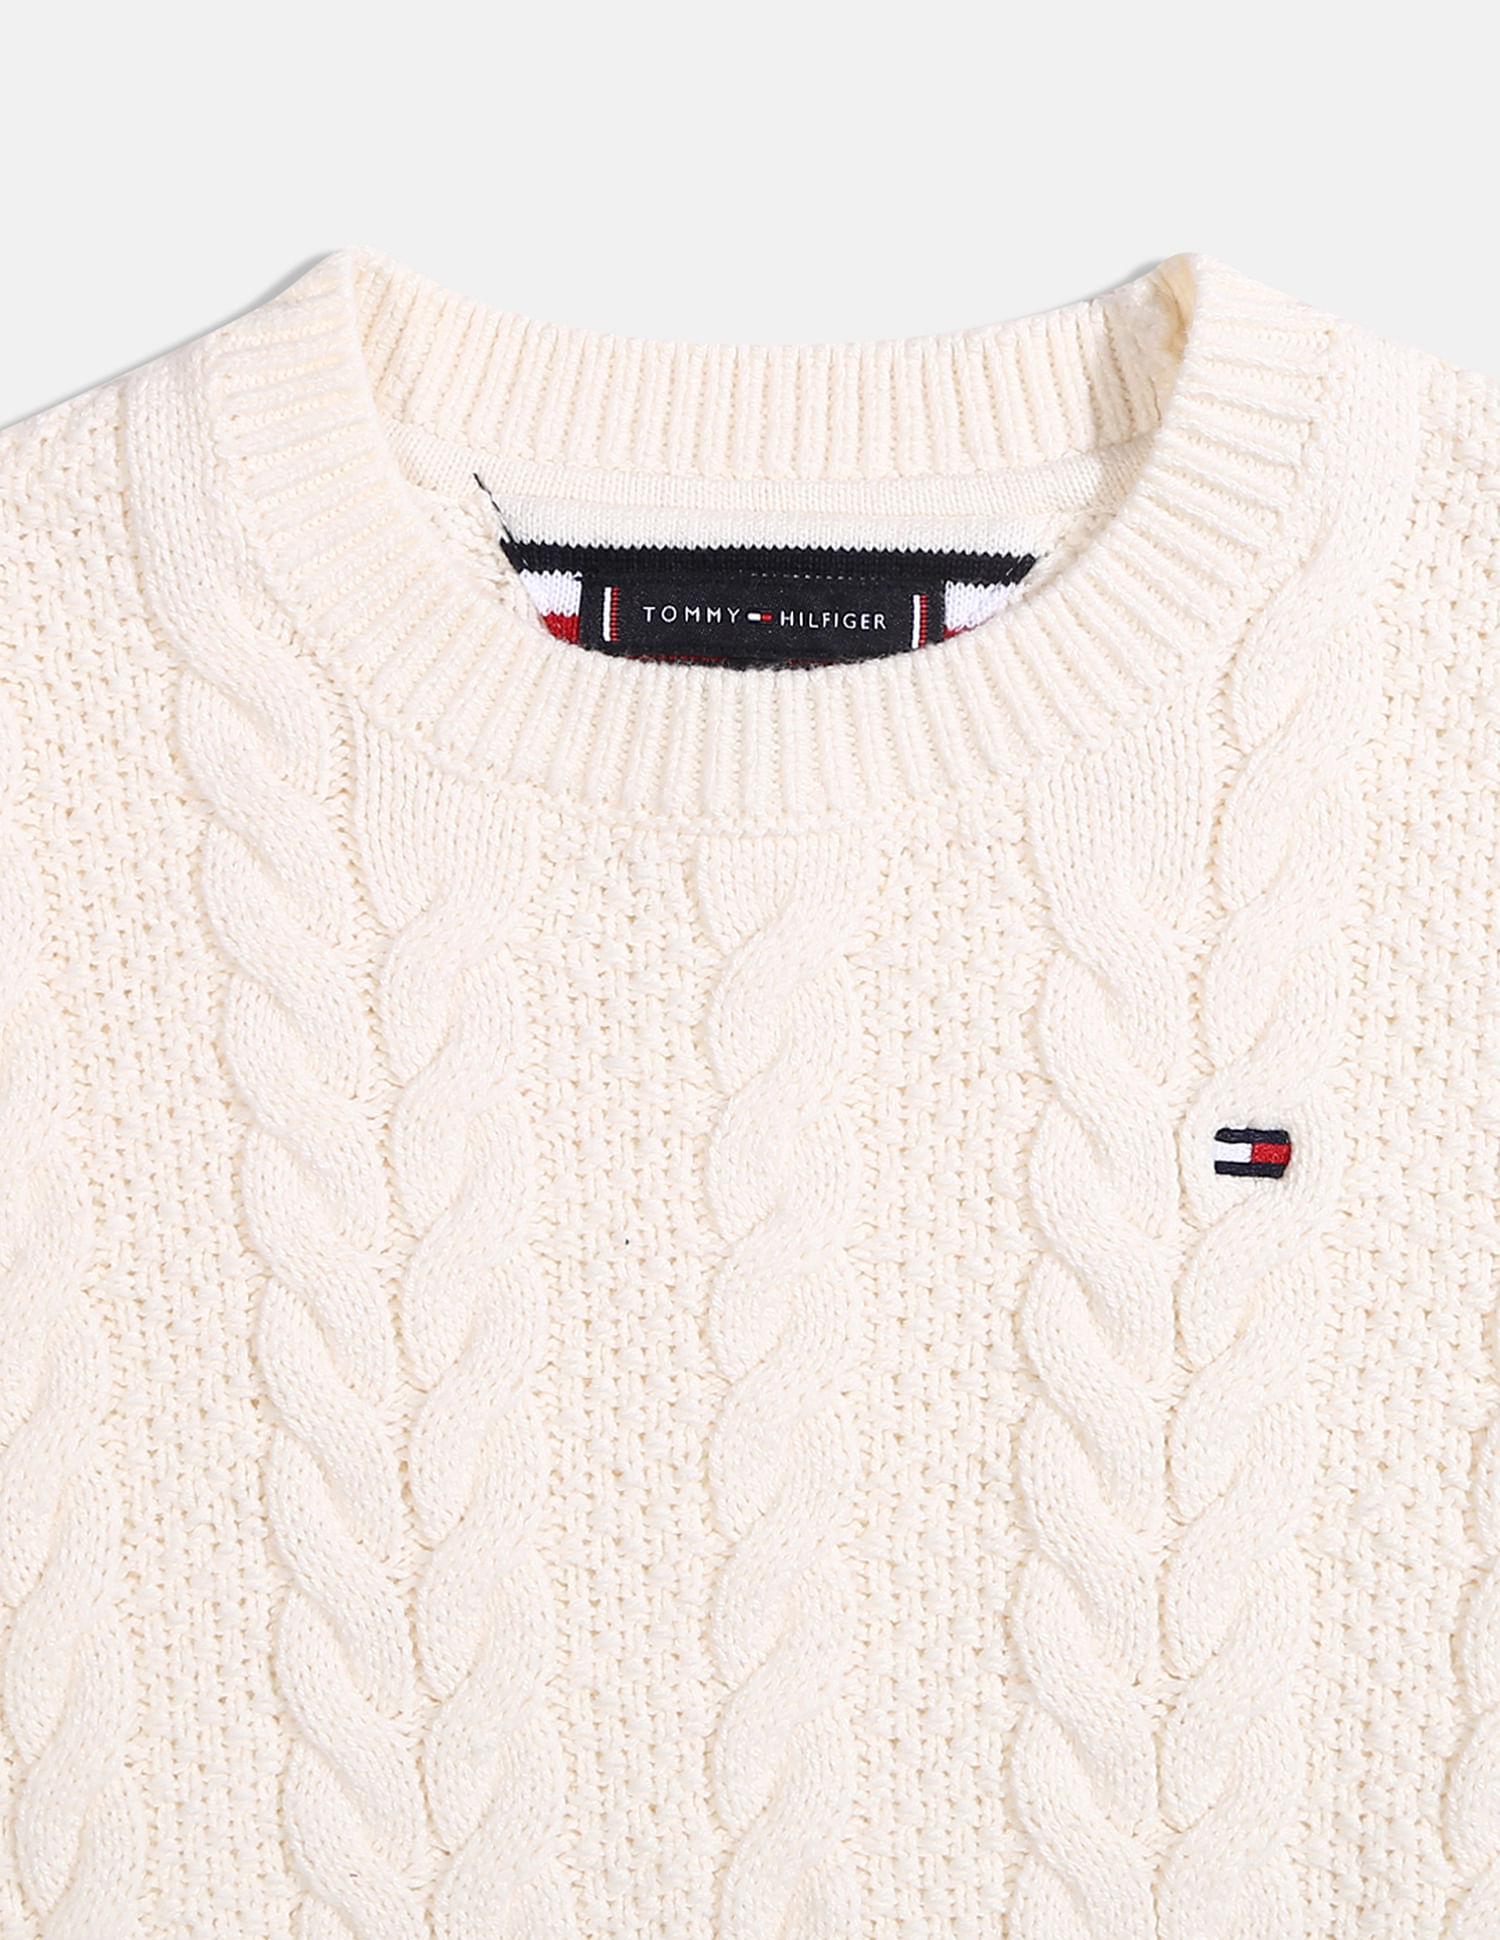 Buy Tommy Hilfiger Kids Boys Ivory Cable Sweater Essential Knit